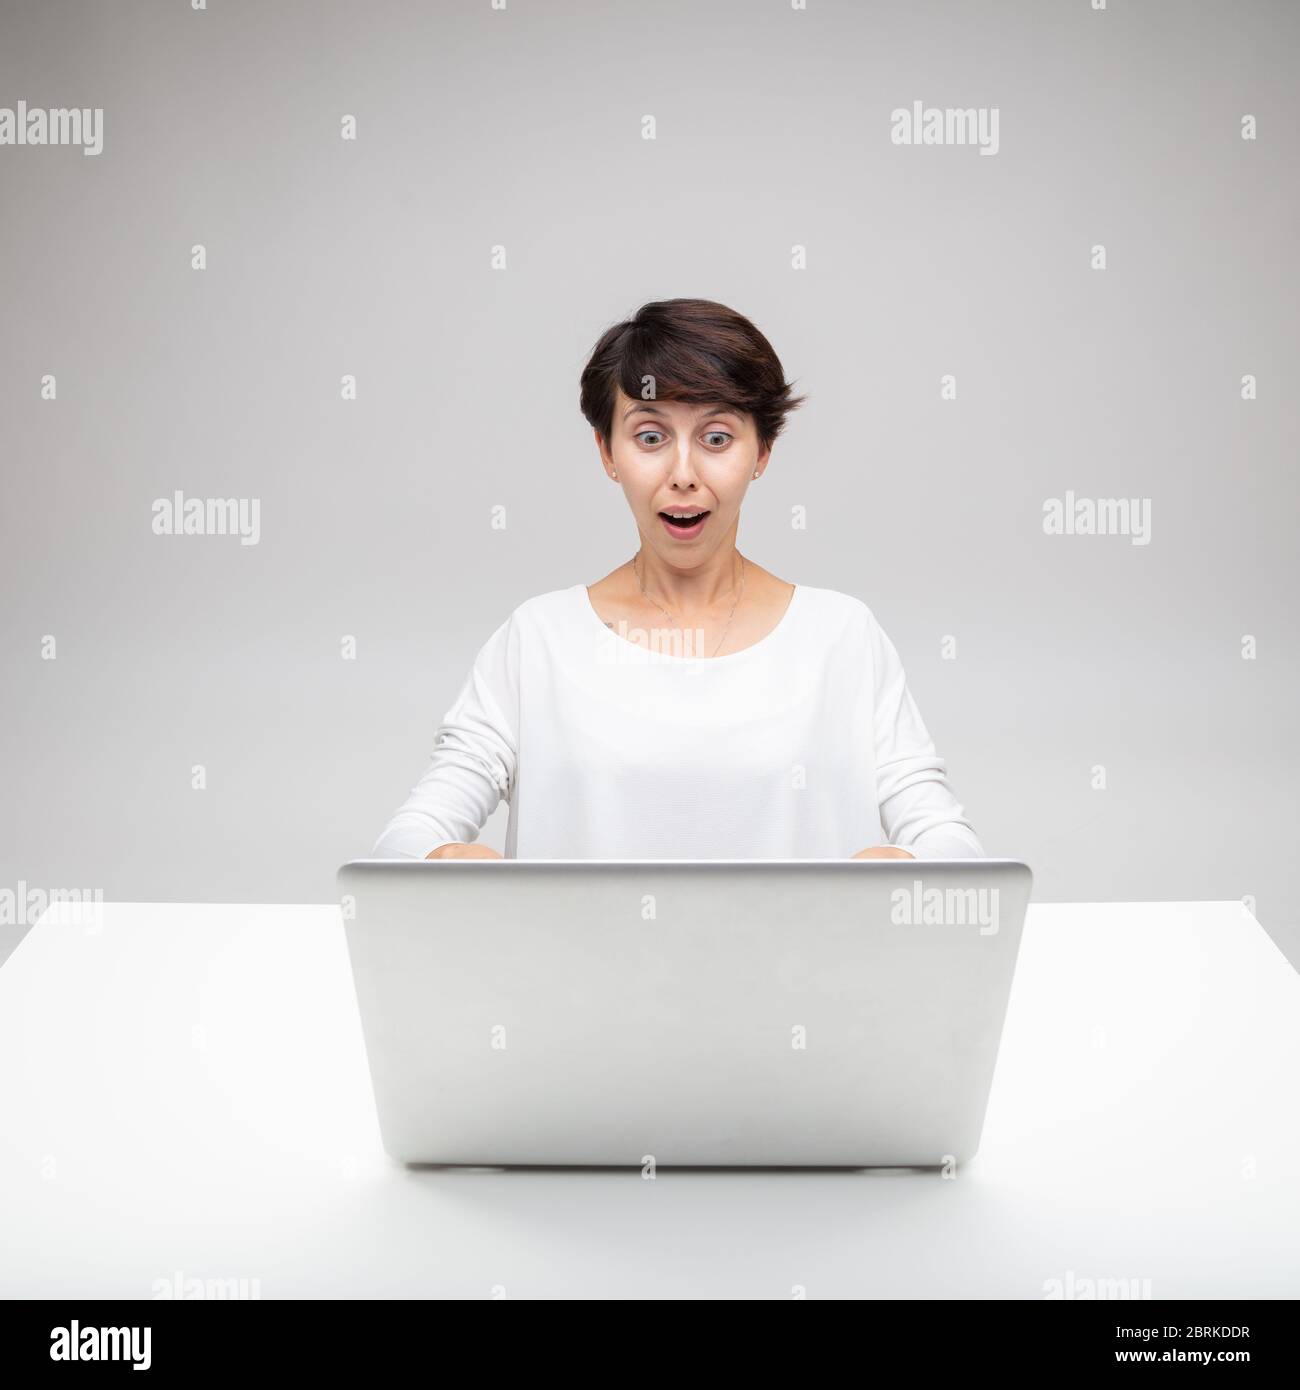 Astonished woman gawping at a laptop in amazement with wide eyes and mouth agape as she sits at a white desk over a grey studio background Stock Photo